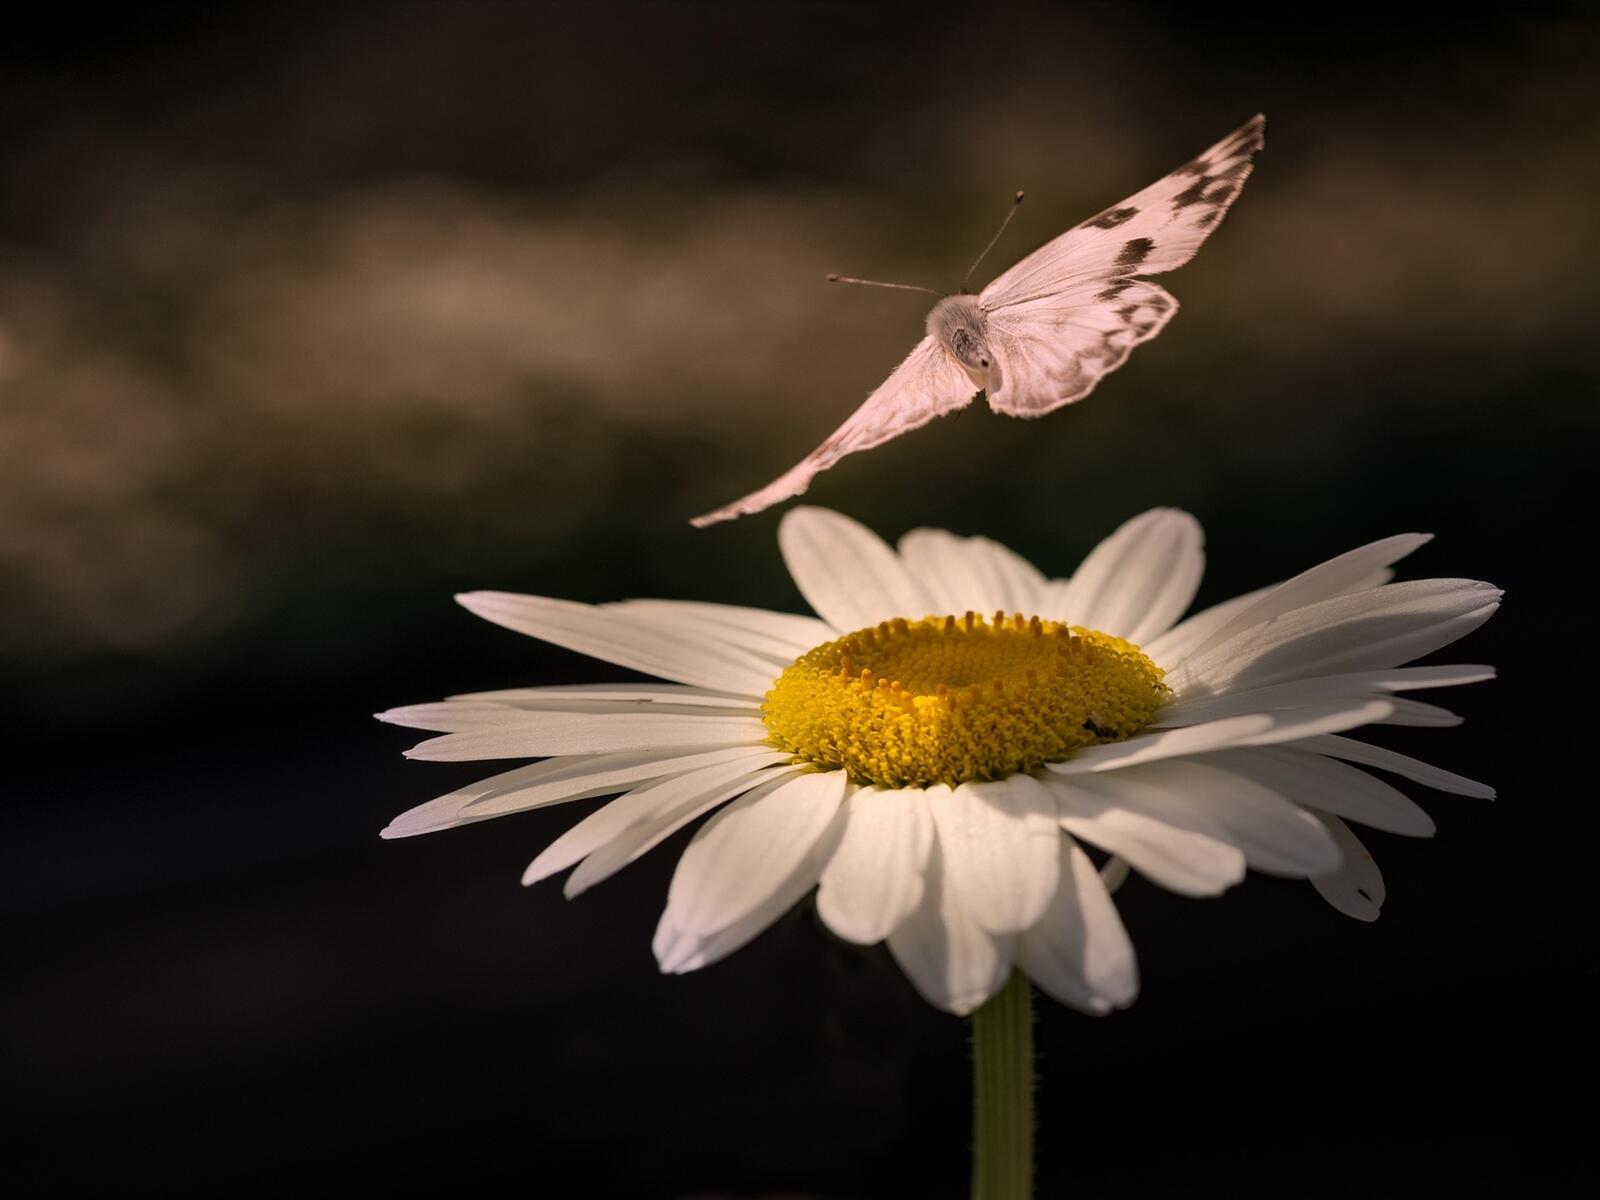 Free photo A butterfly lands on a daisy